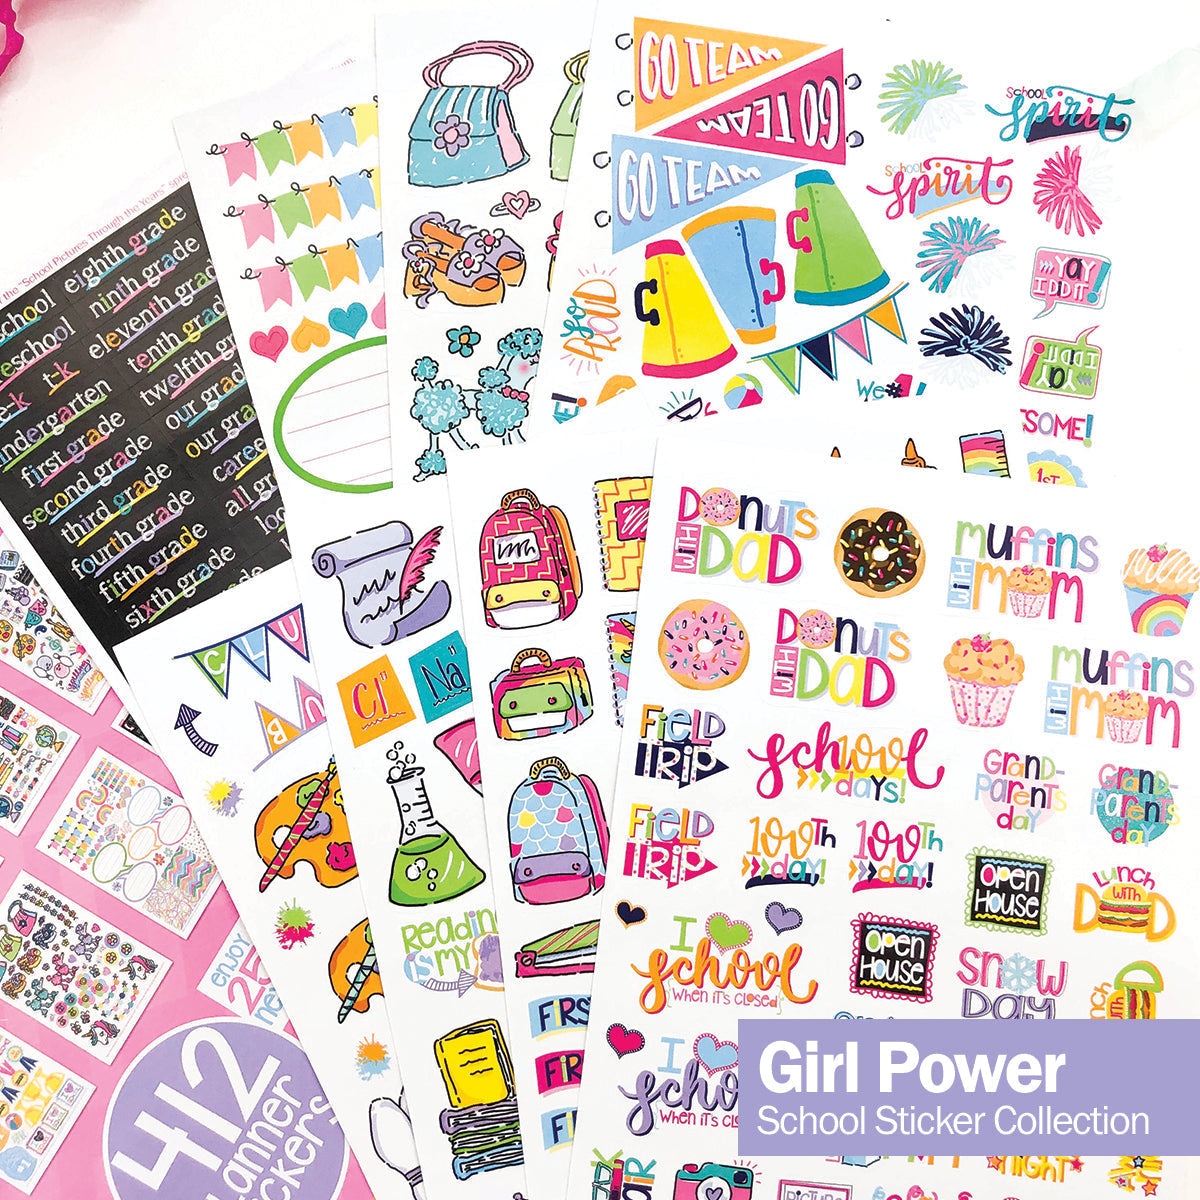 Best Planner Stickers | Family, Work, To-Dos, Events, Goals | 8 Styles